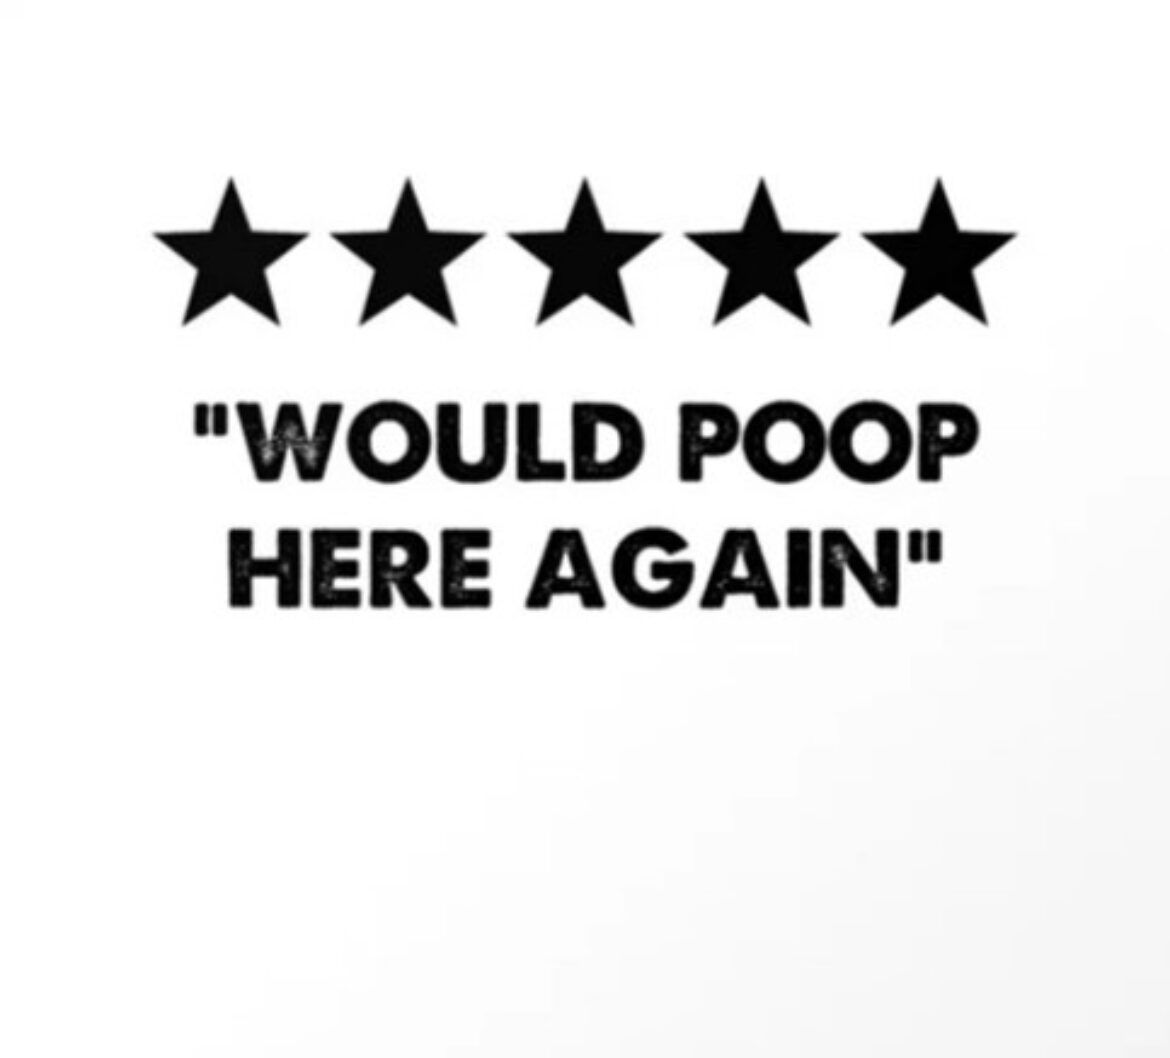 A review and star rating - would poop here again